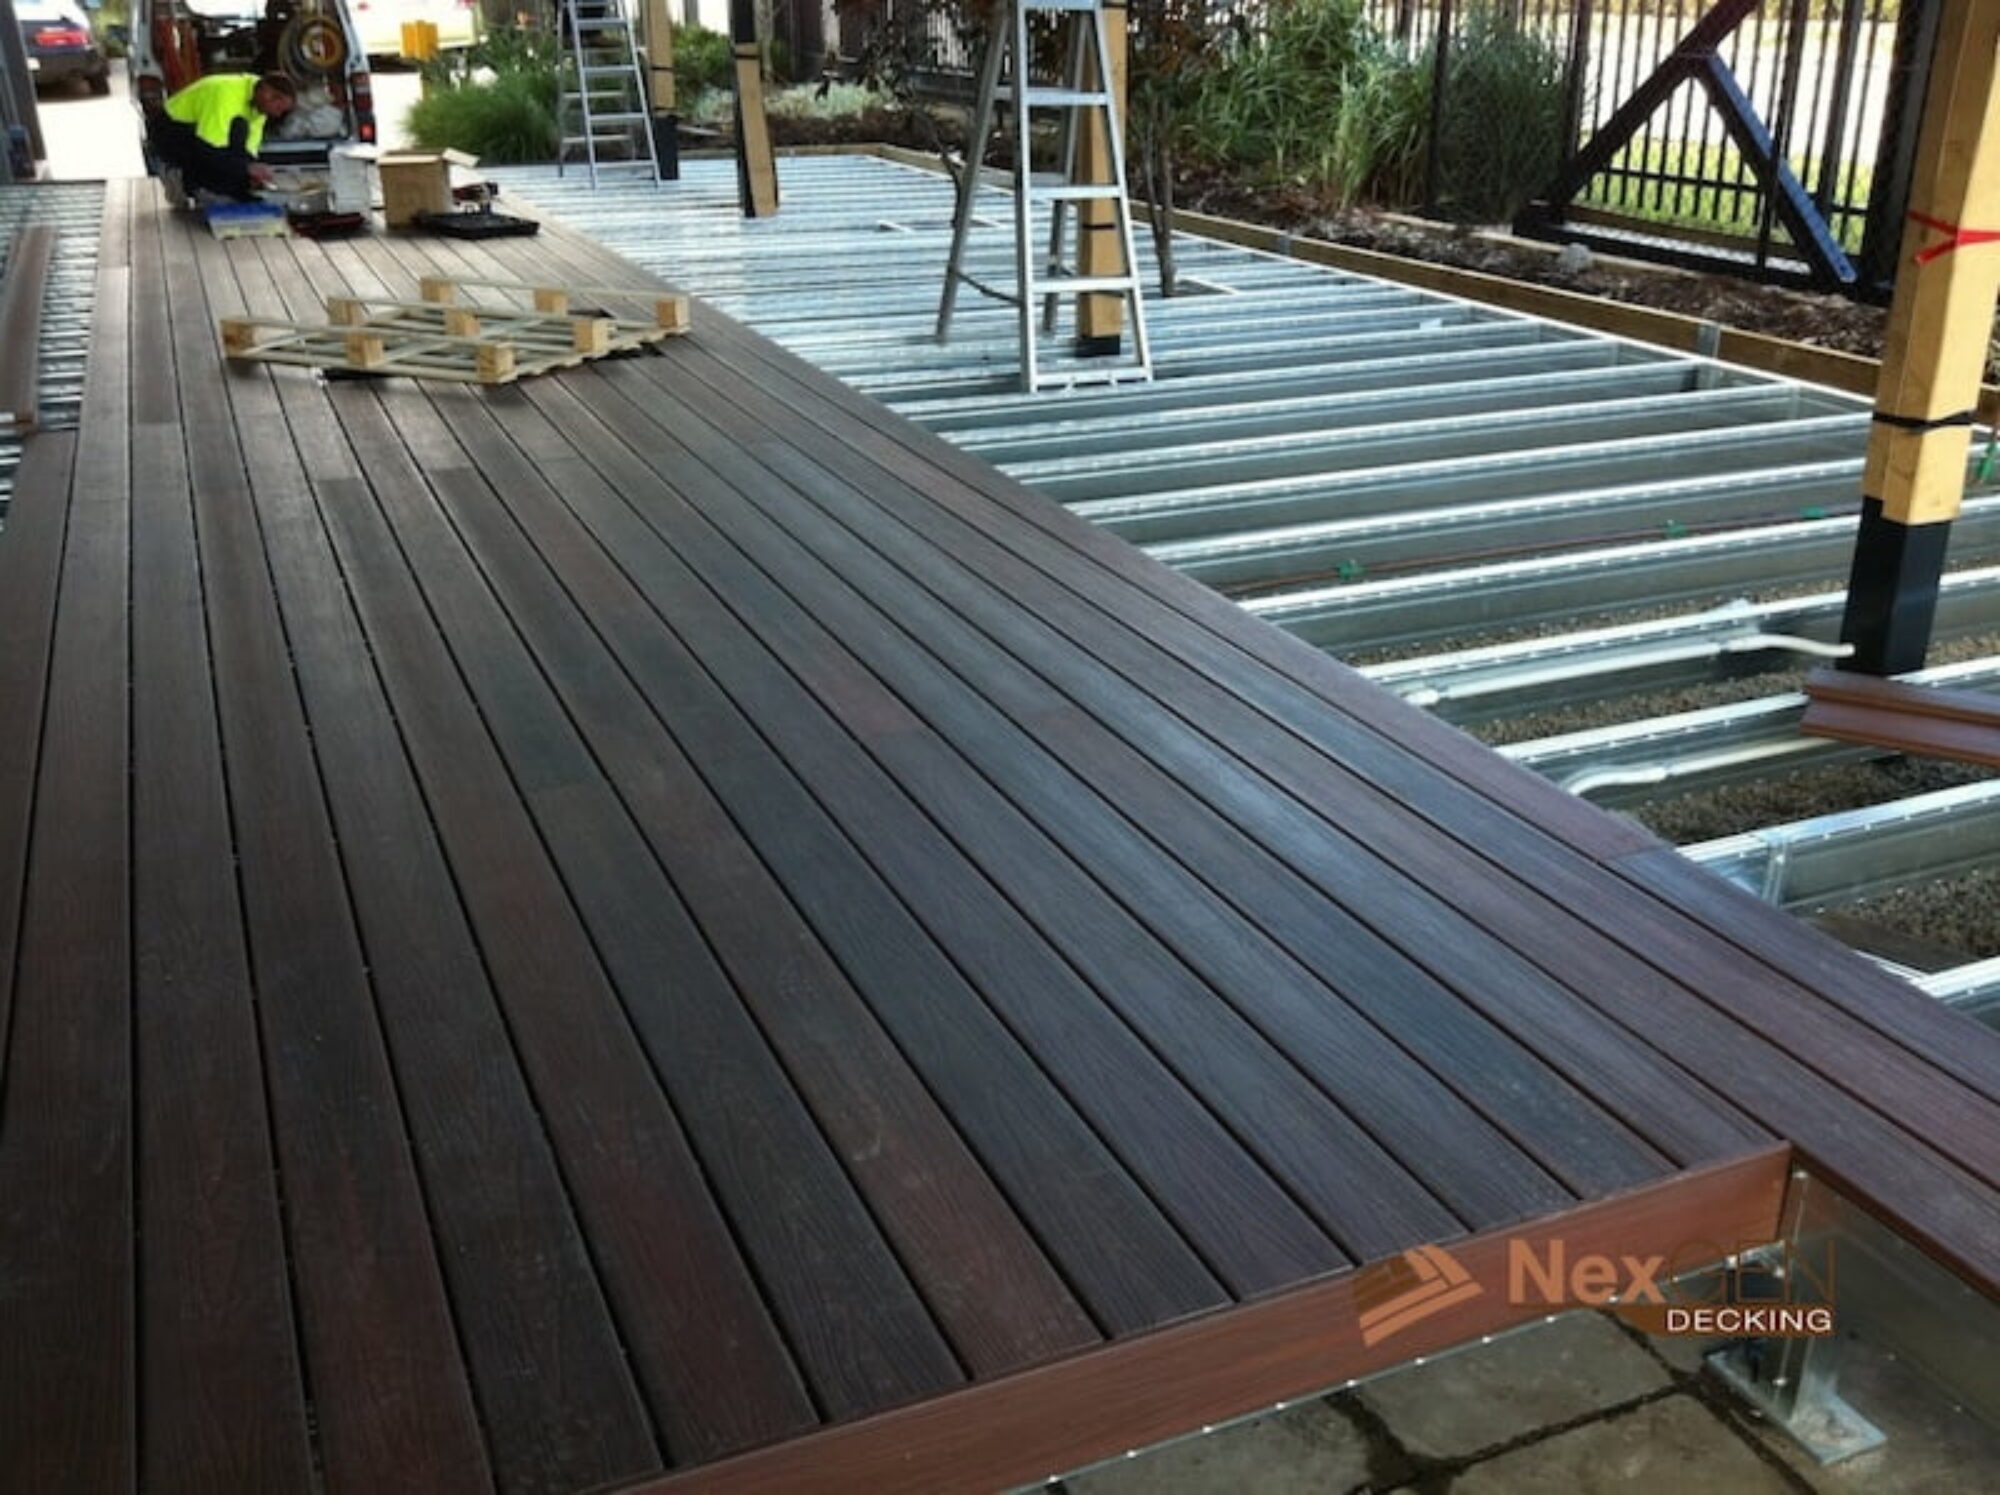 How to Choose a Reliable Deck Builder Contractor To Install Your New Deck